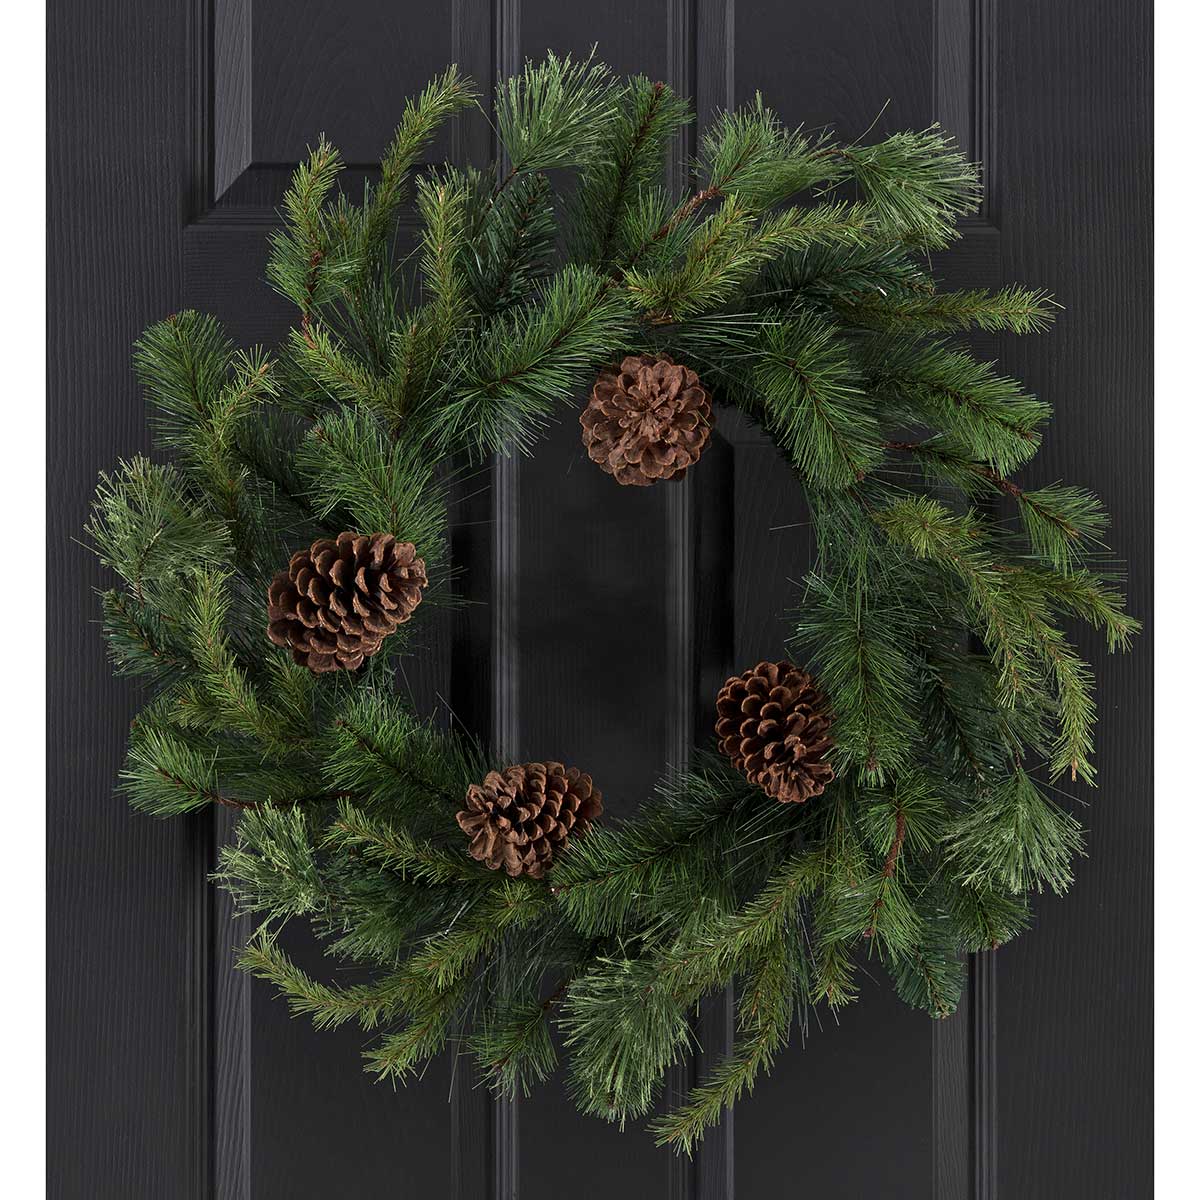 WREATH AUSTRIAN PINE MIX 28IN (INNER RING 13IN) - Click Image to Close